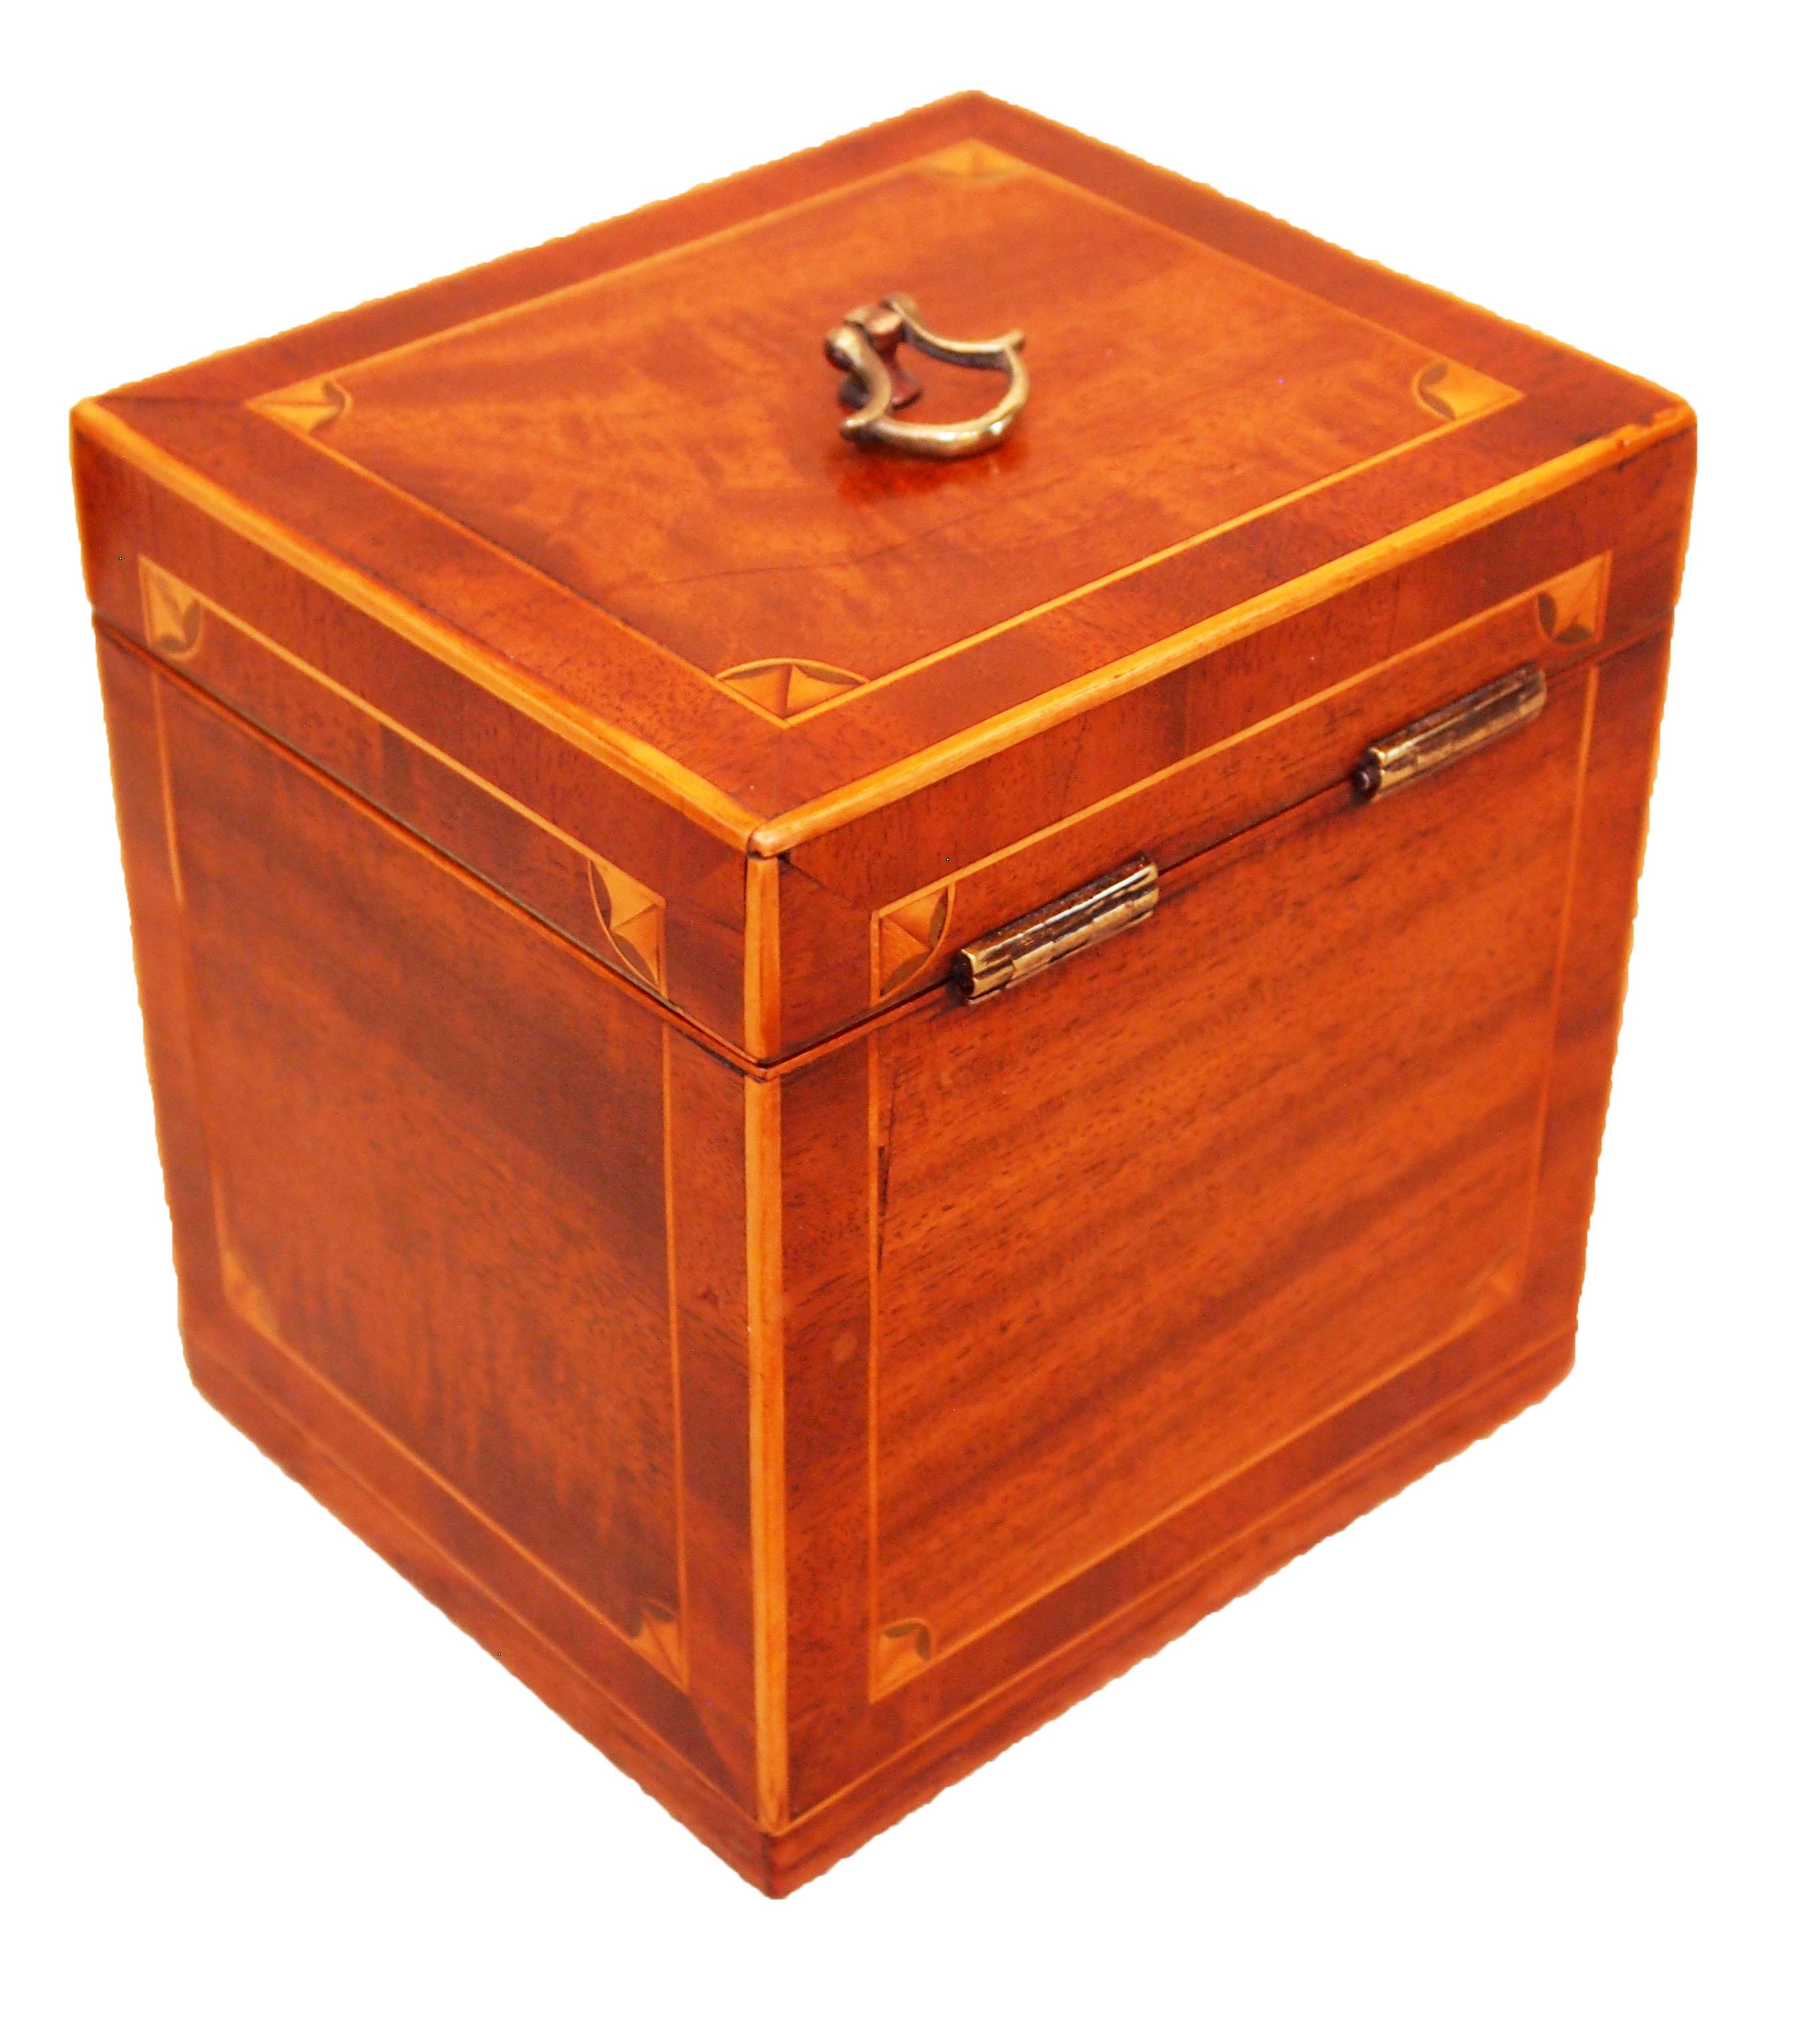 An attractive George III period mahogany oblong.
Tea caddy having inlaid decoration.